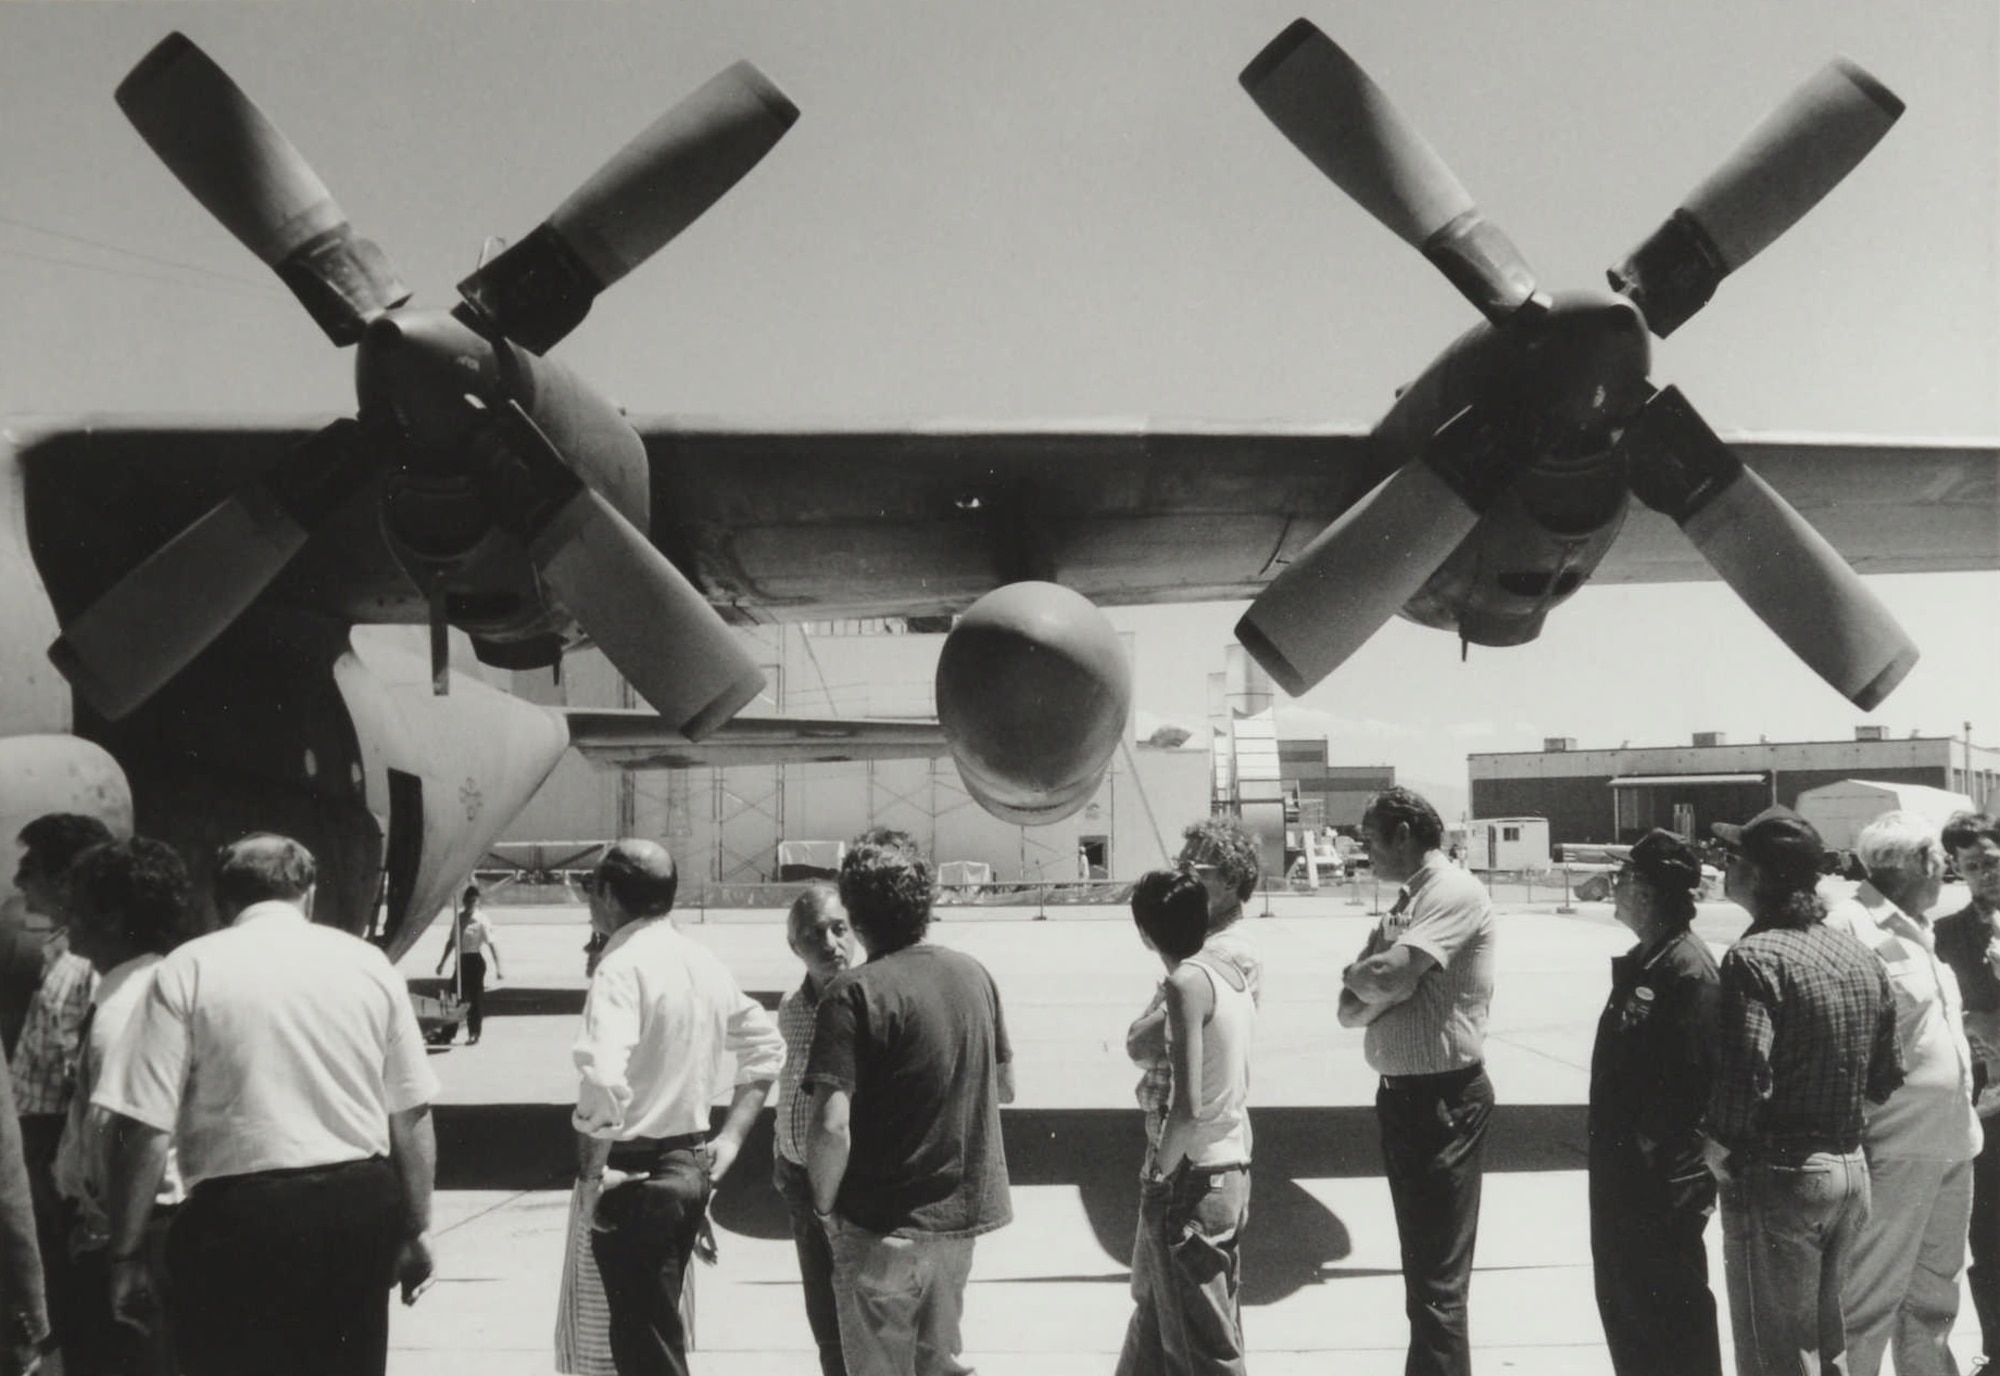 A line formed on July 8, 1988, when the Ogden ALC made the first C-130 Hercules to arrive at Hill AFB for depot maintenance available for viewing by base personnel.